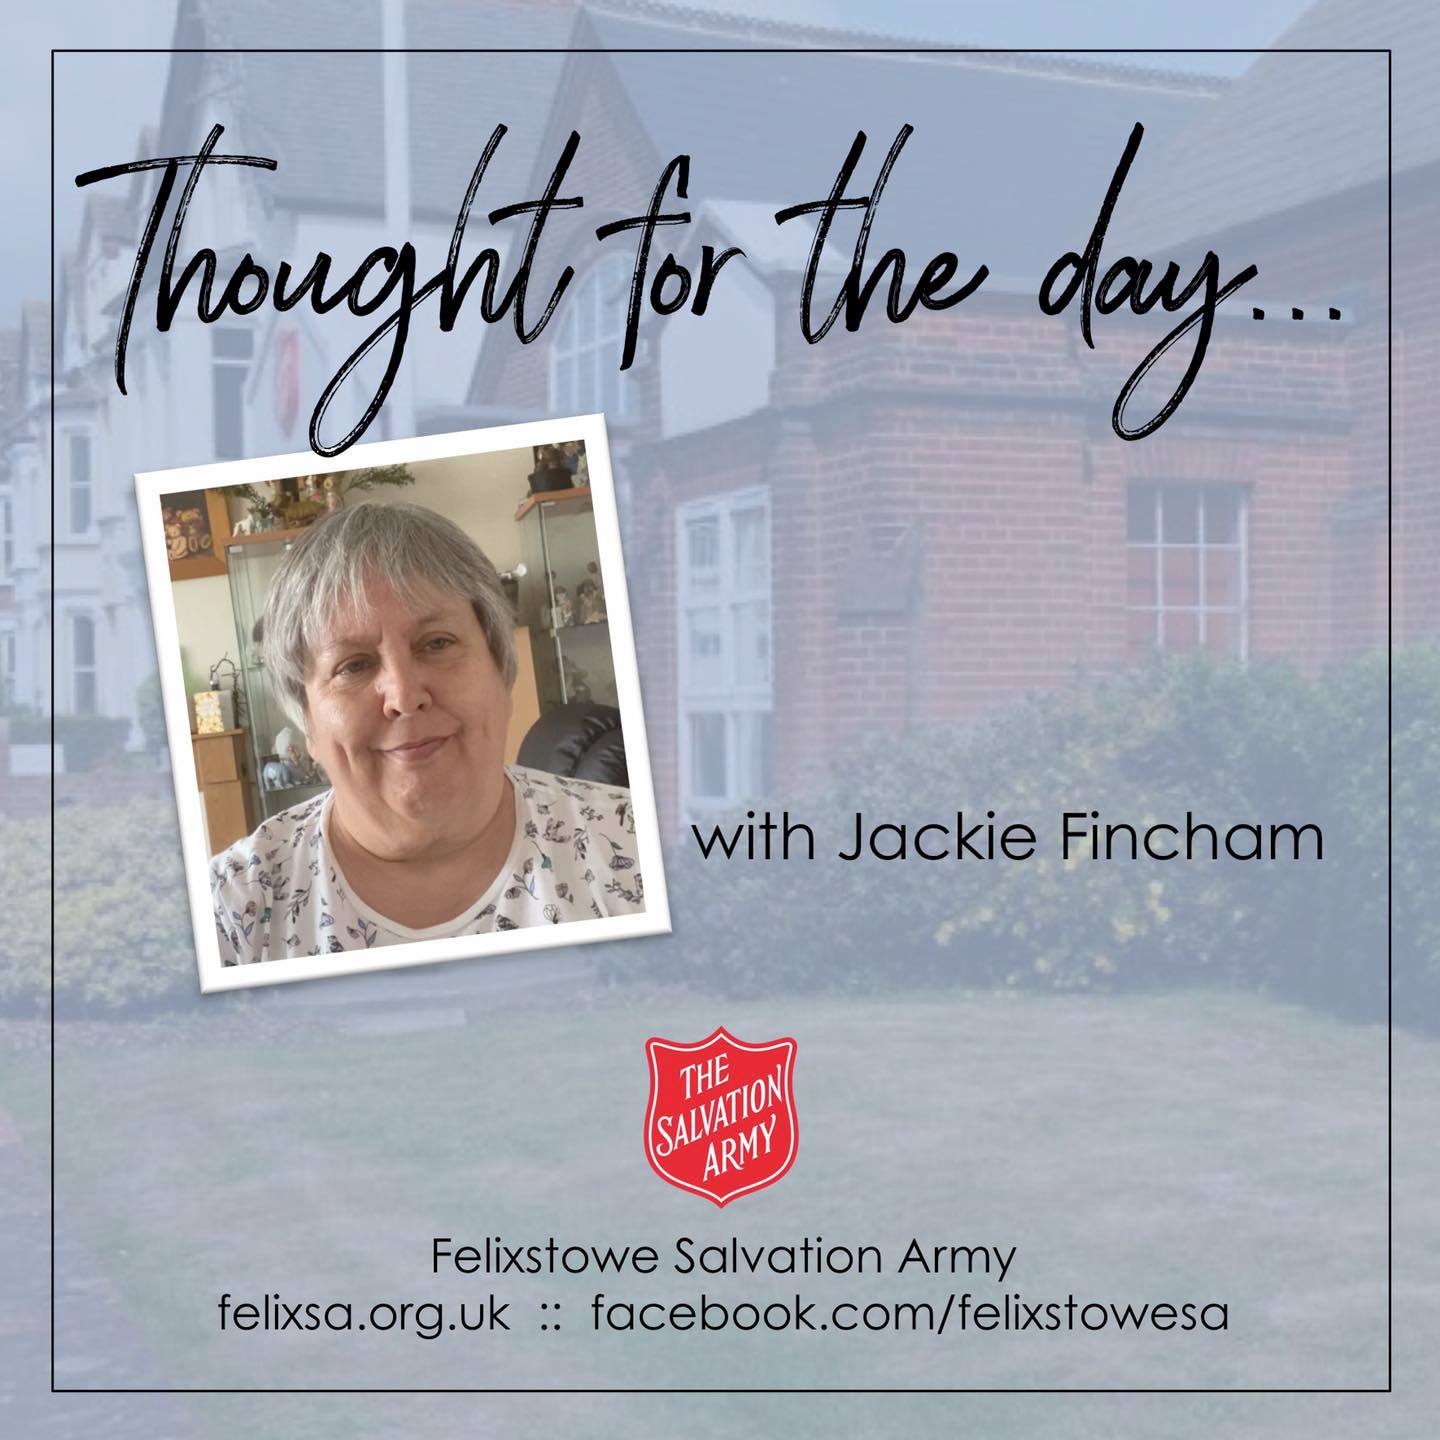 Thought for the Day with Jackie Fincham